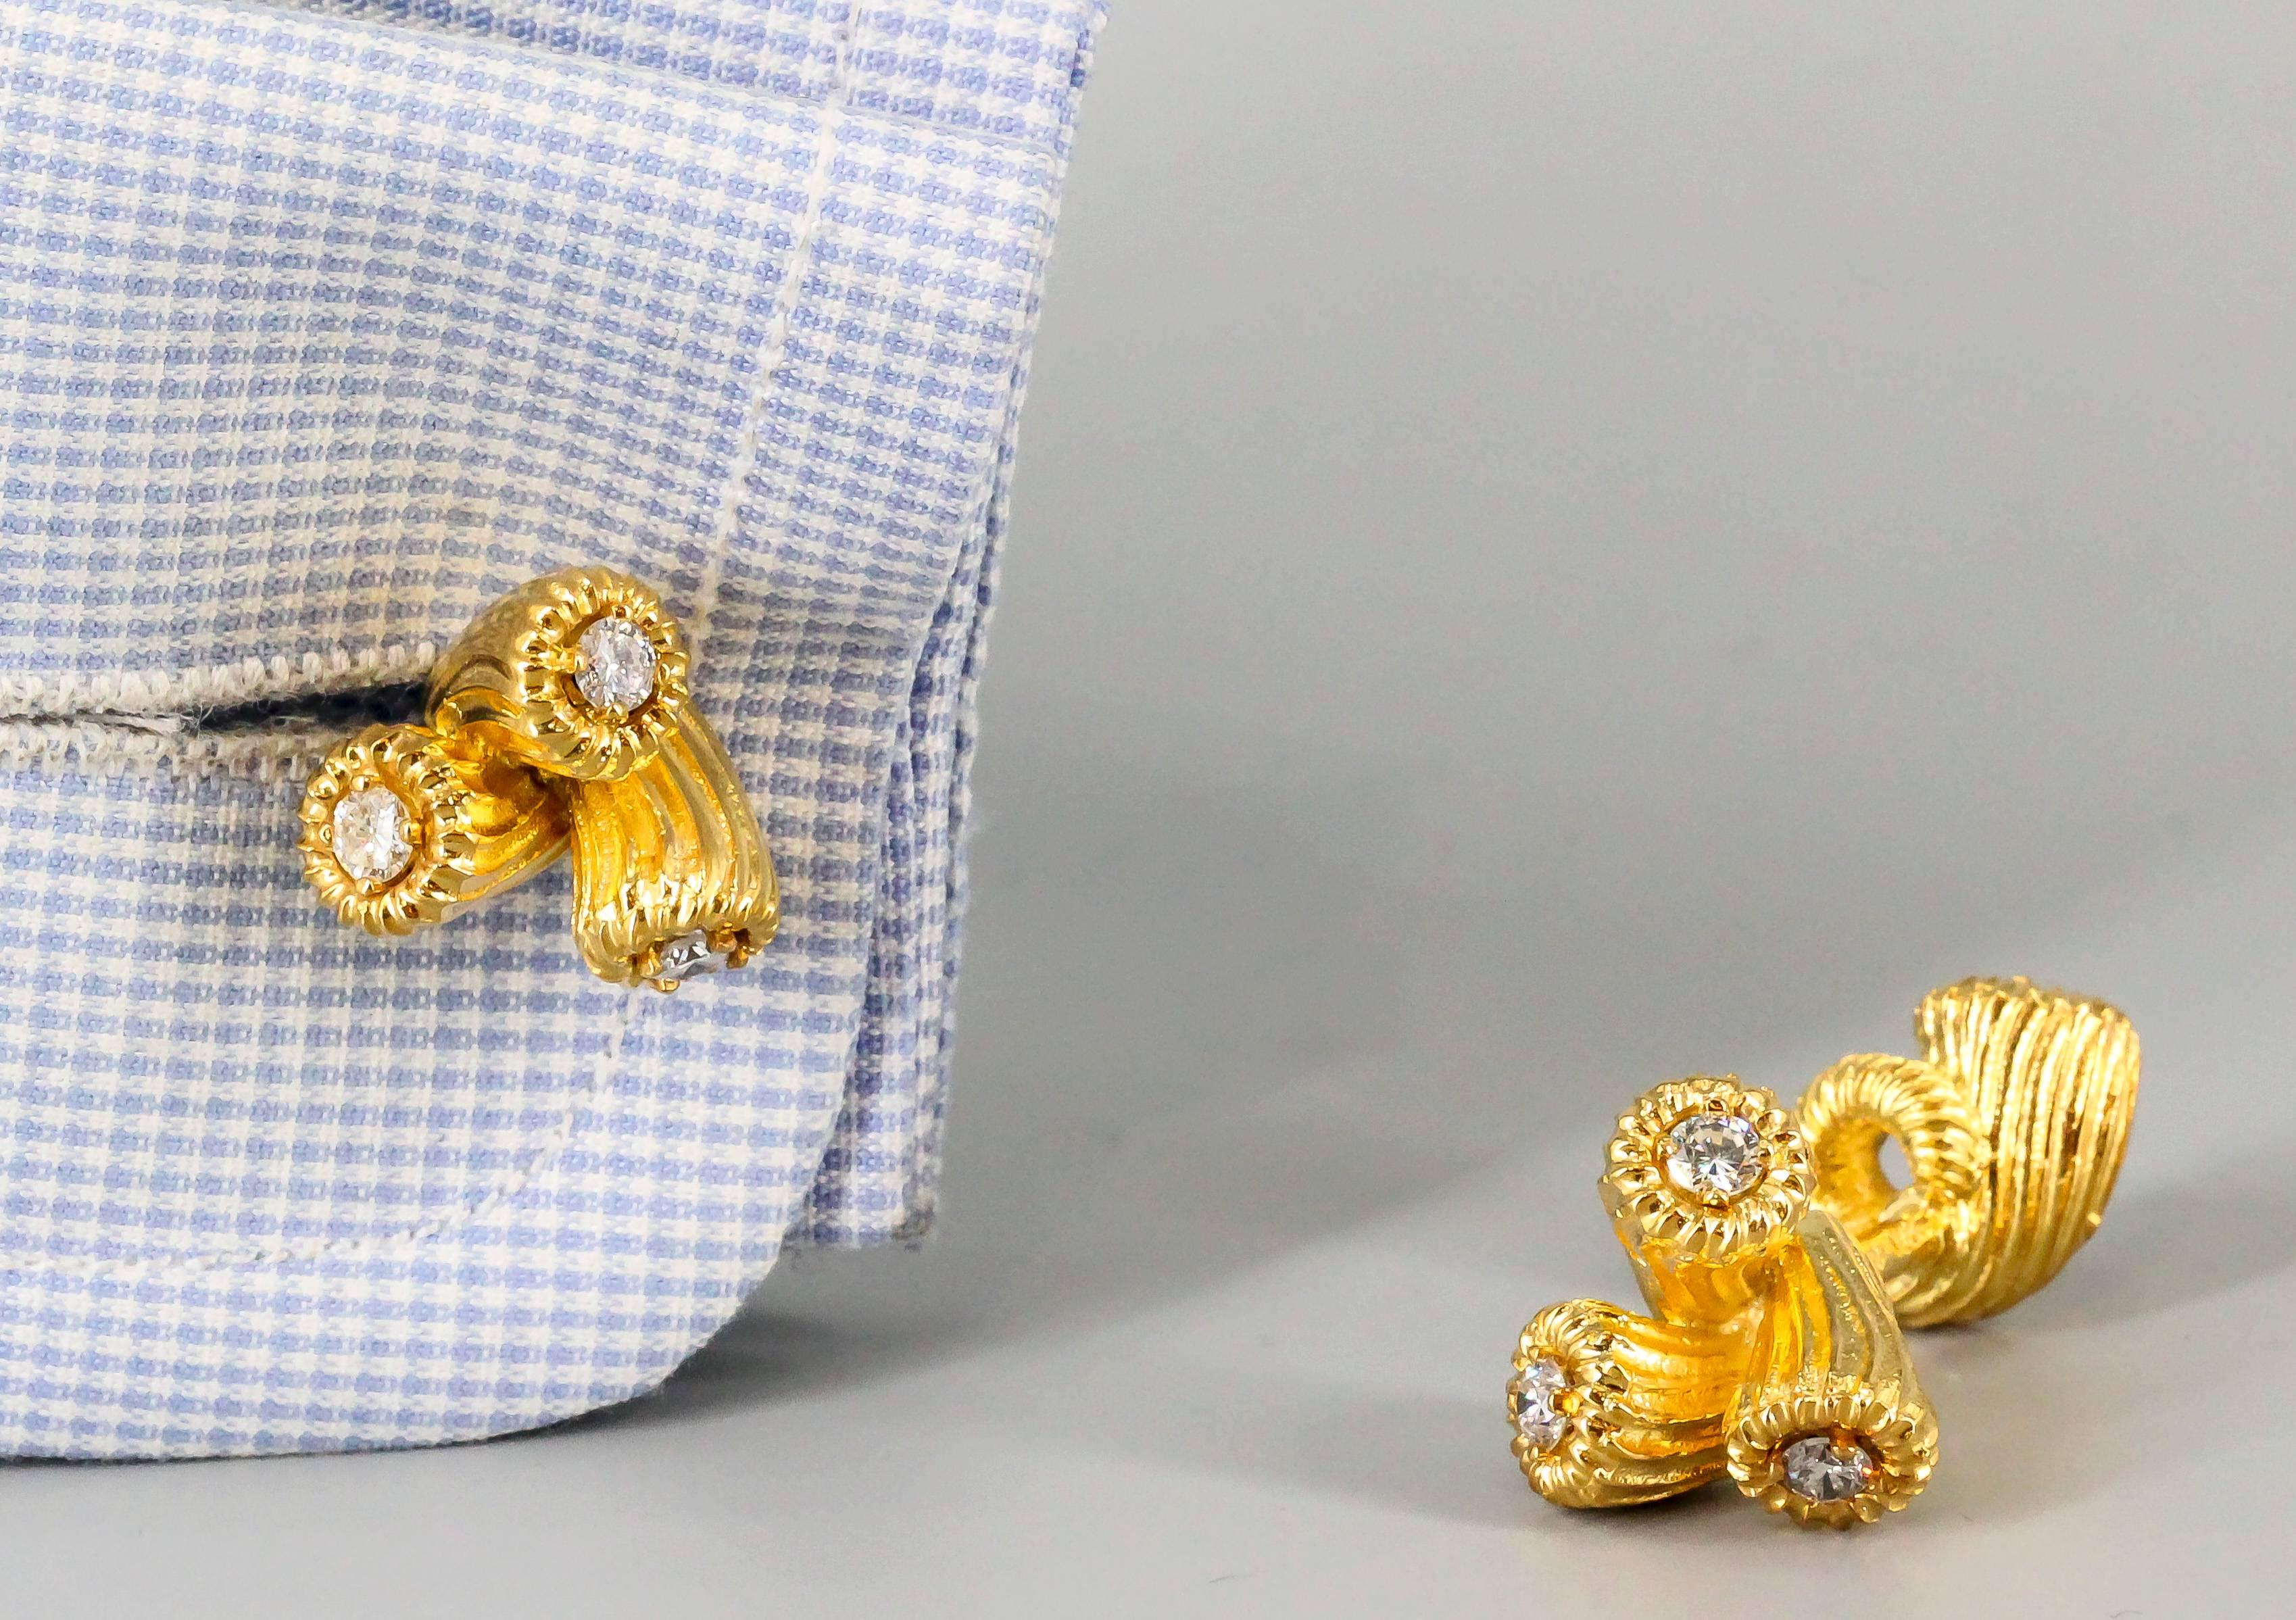 Fine diamond and 18K yellow gold cufflinks from the 